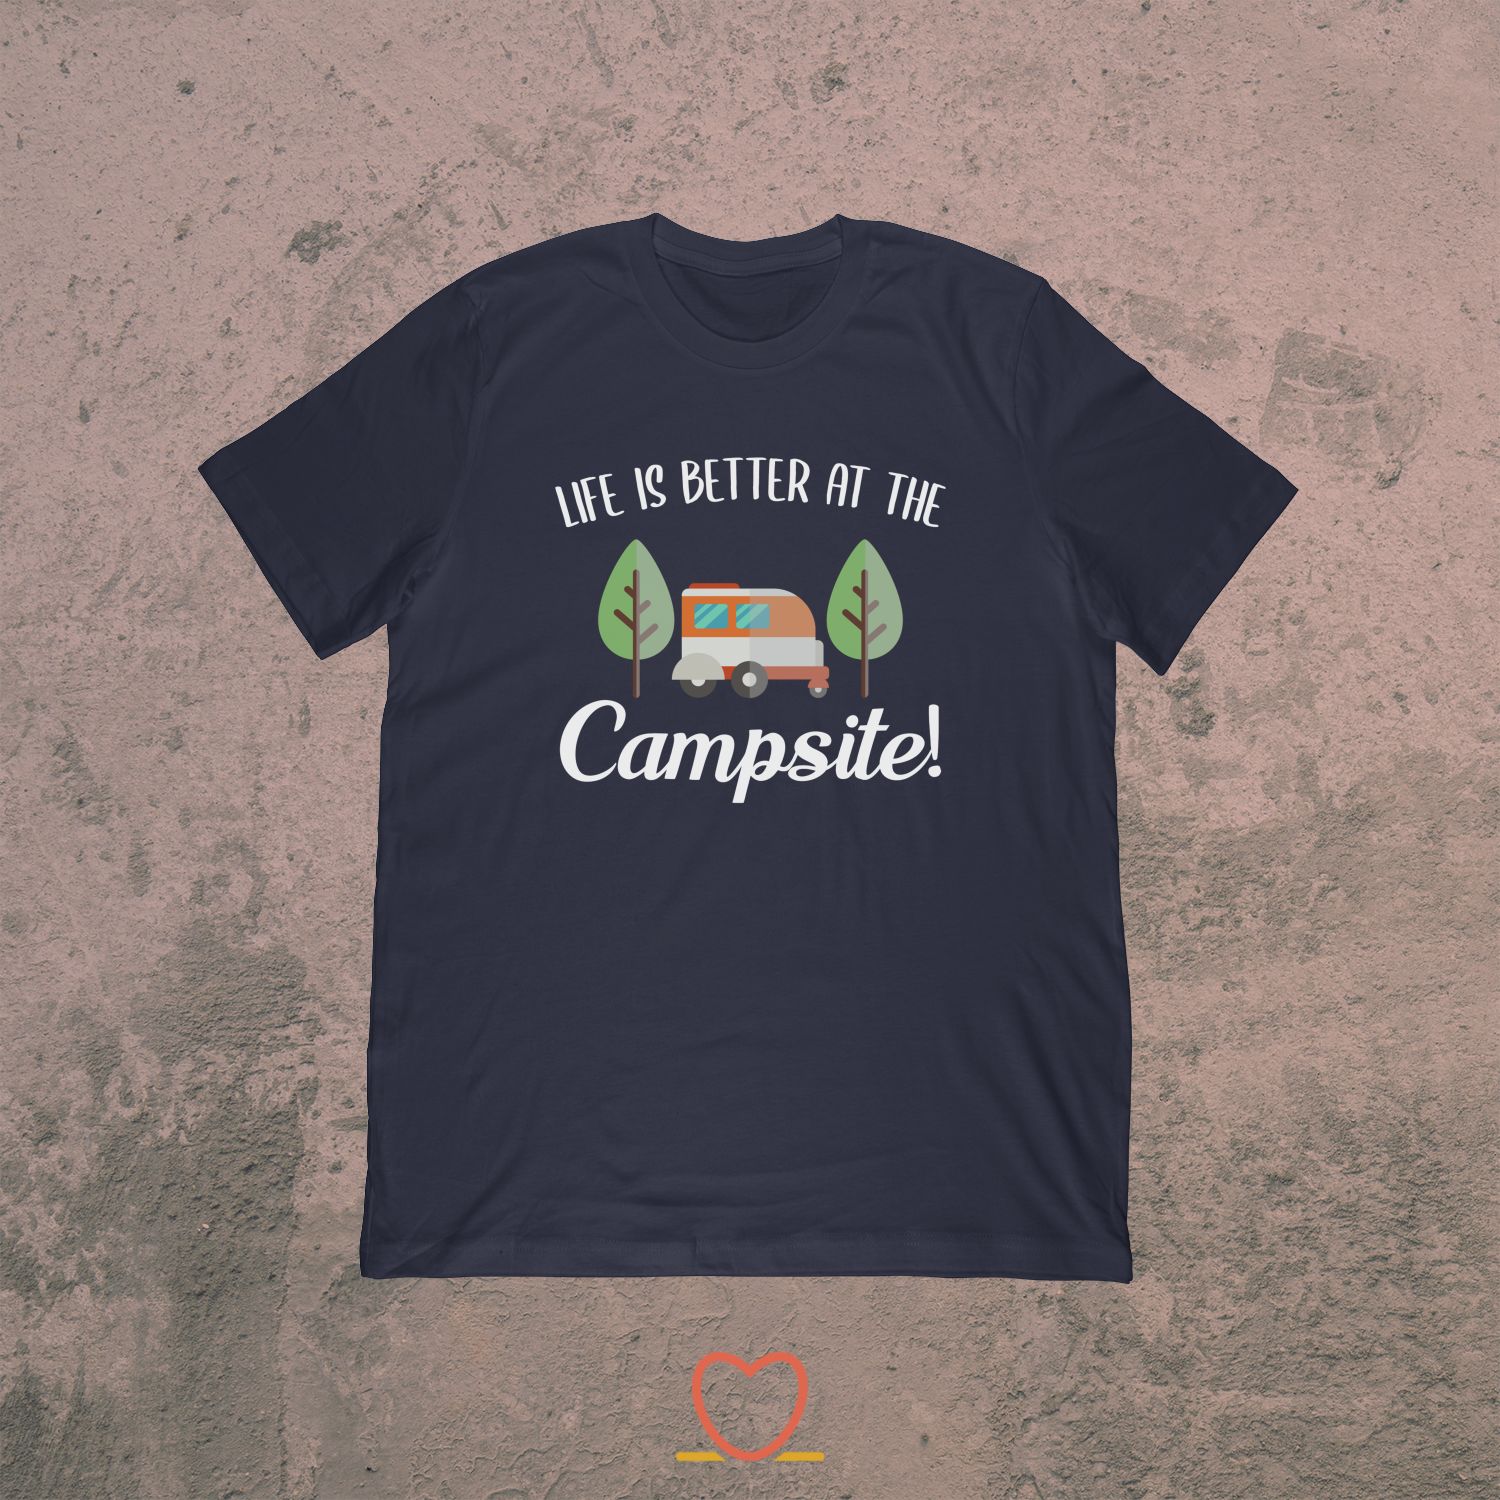 Life Is Better At The Campsite – Camping Tee